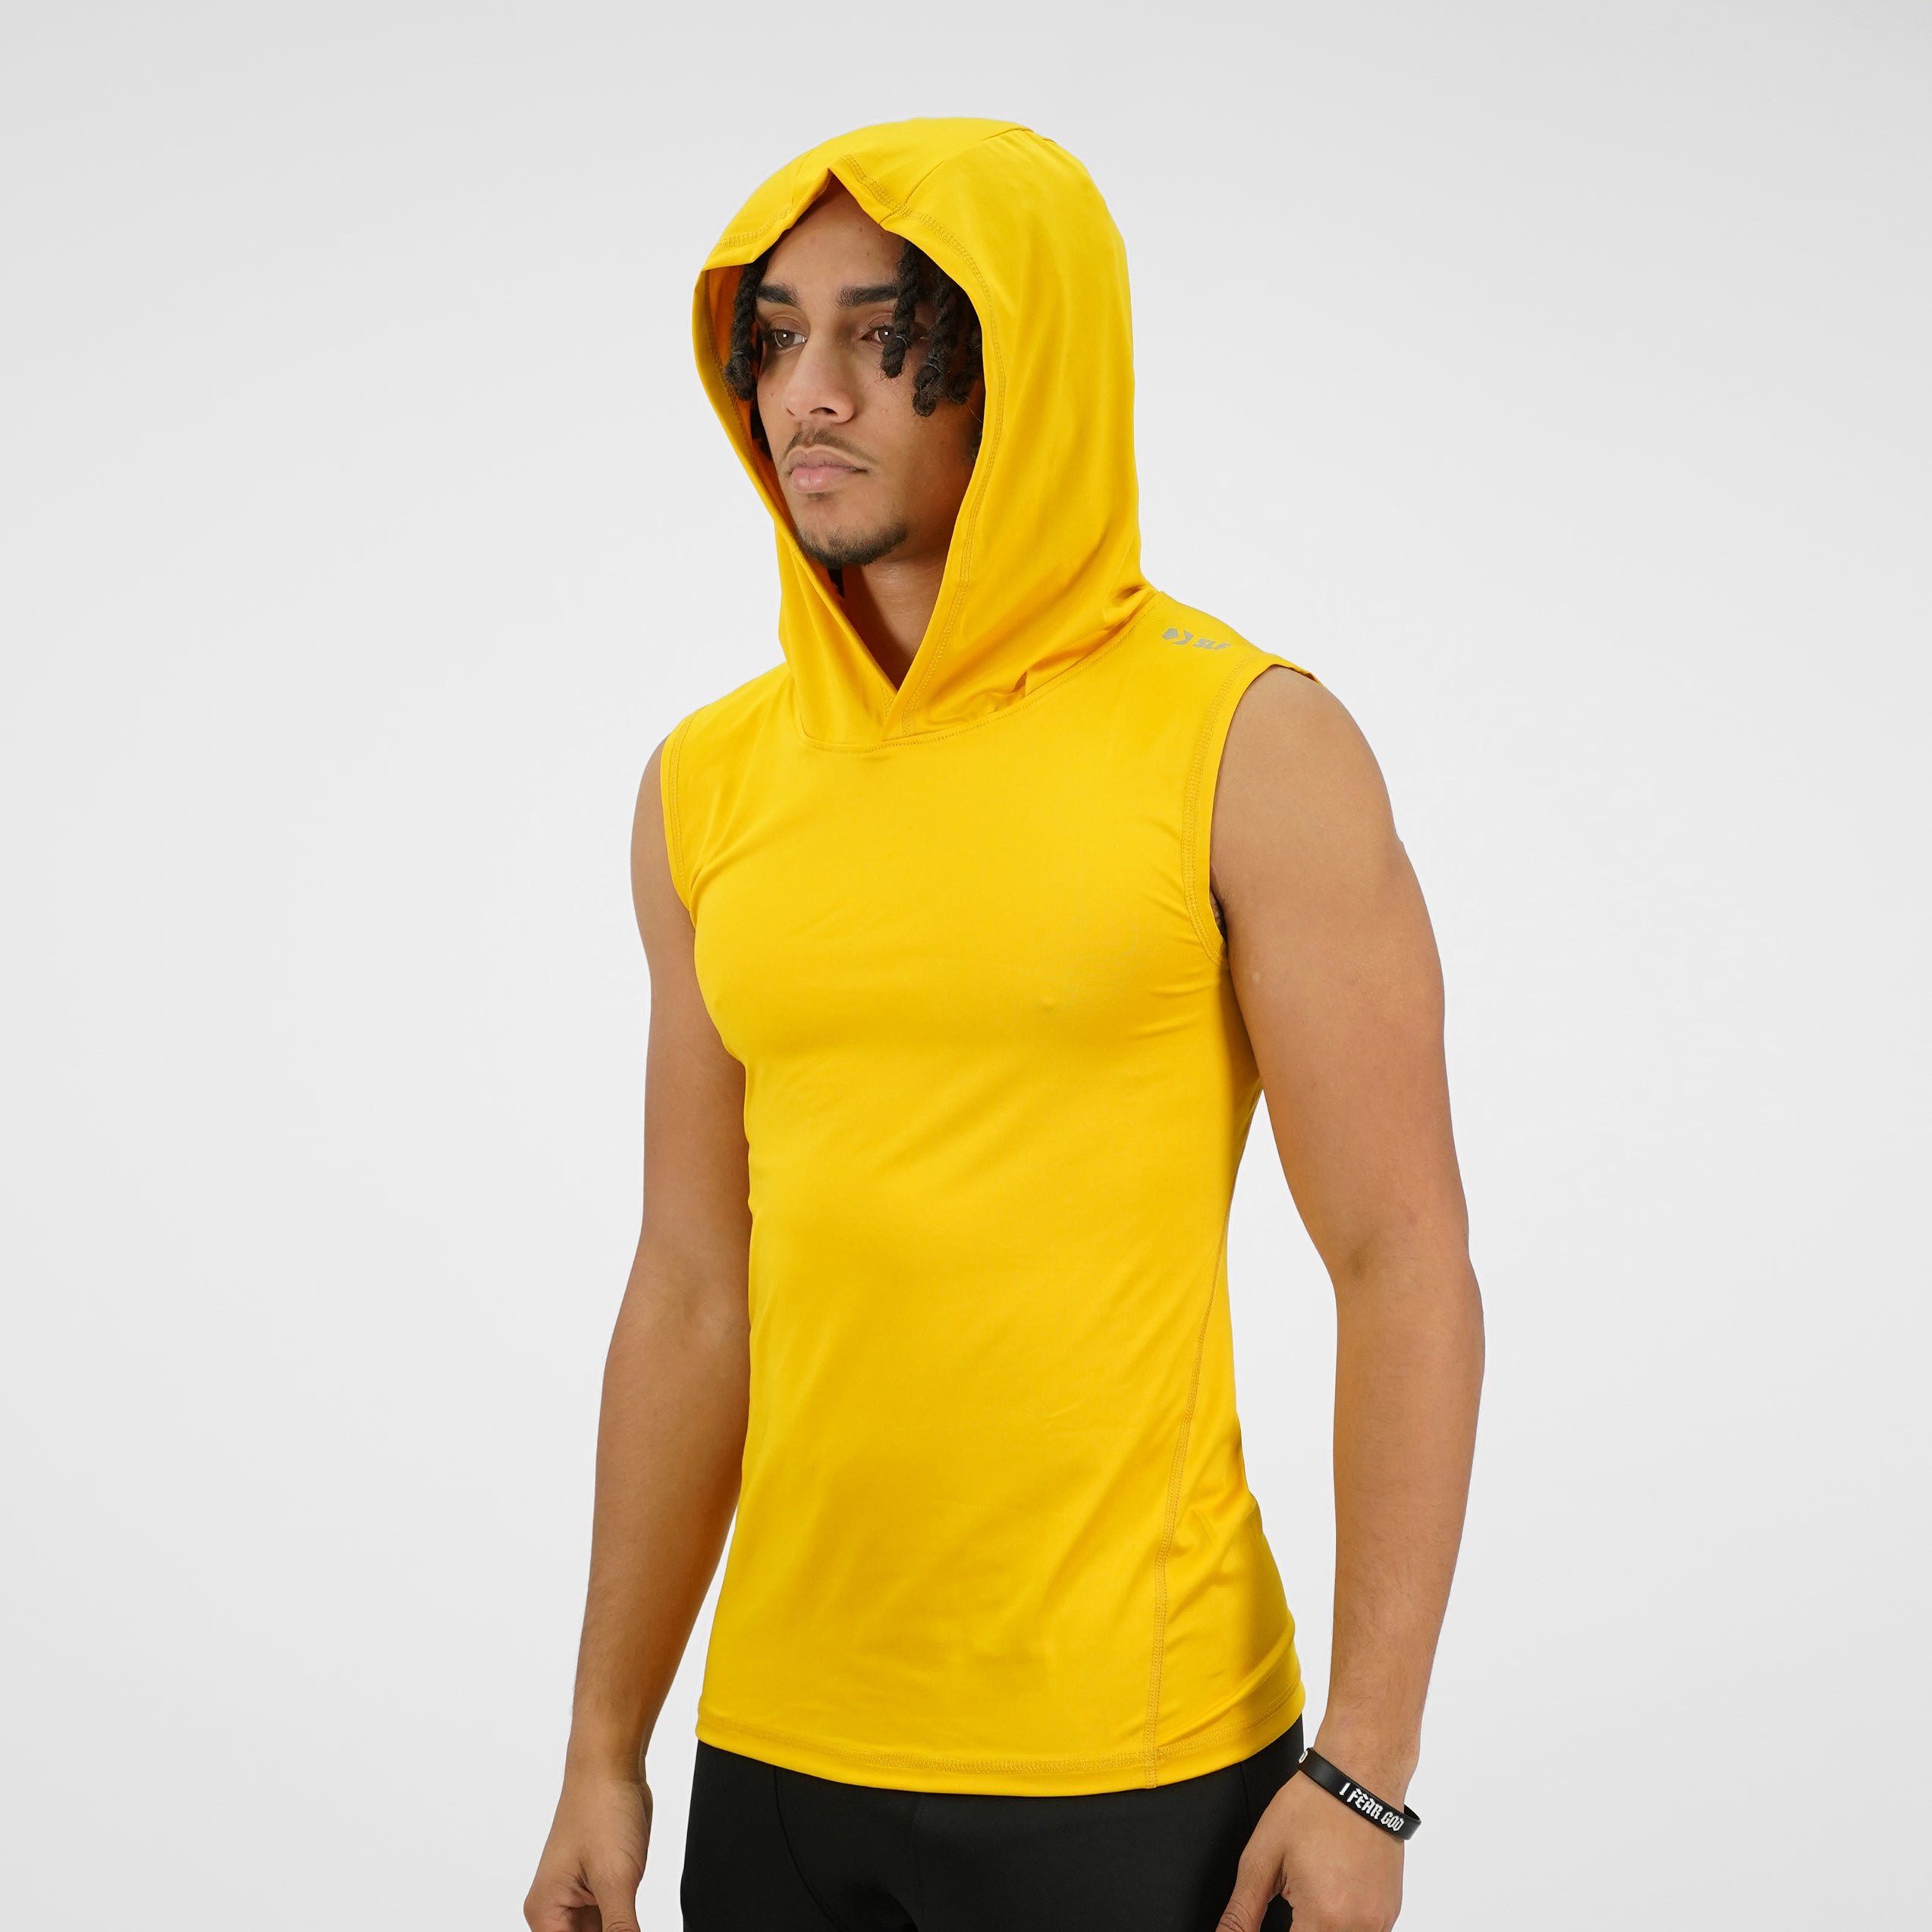 Men's Sleeveless Compression Shirt Discount Compare